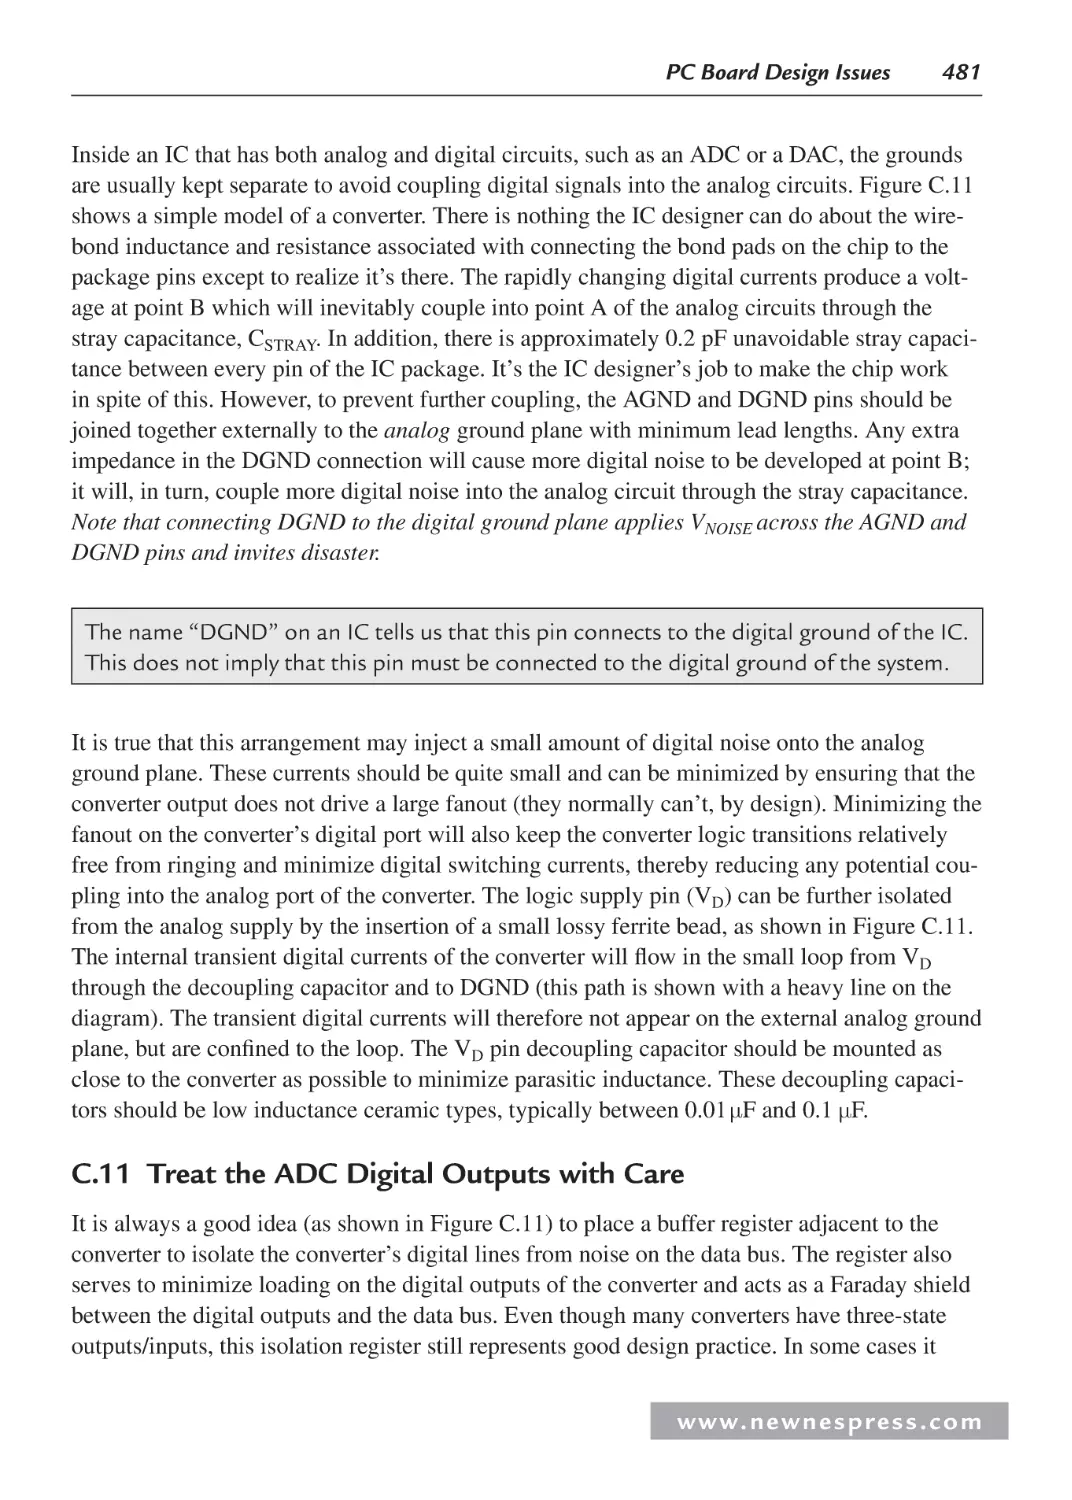 C.11 Treat the ADC Digital Outputs with Care